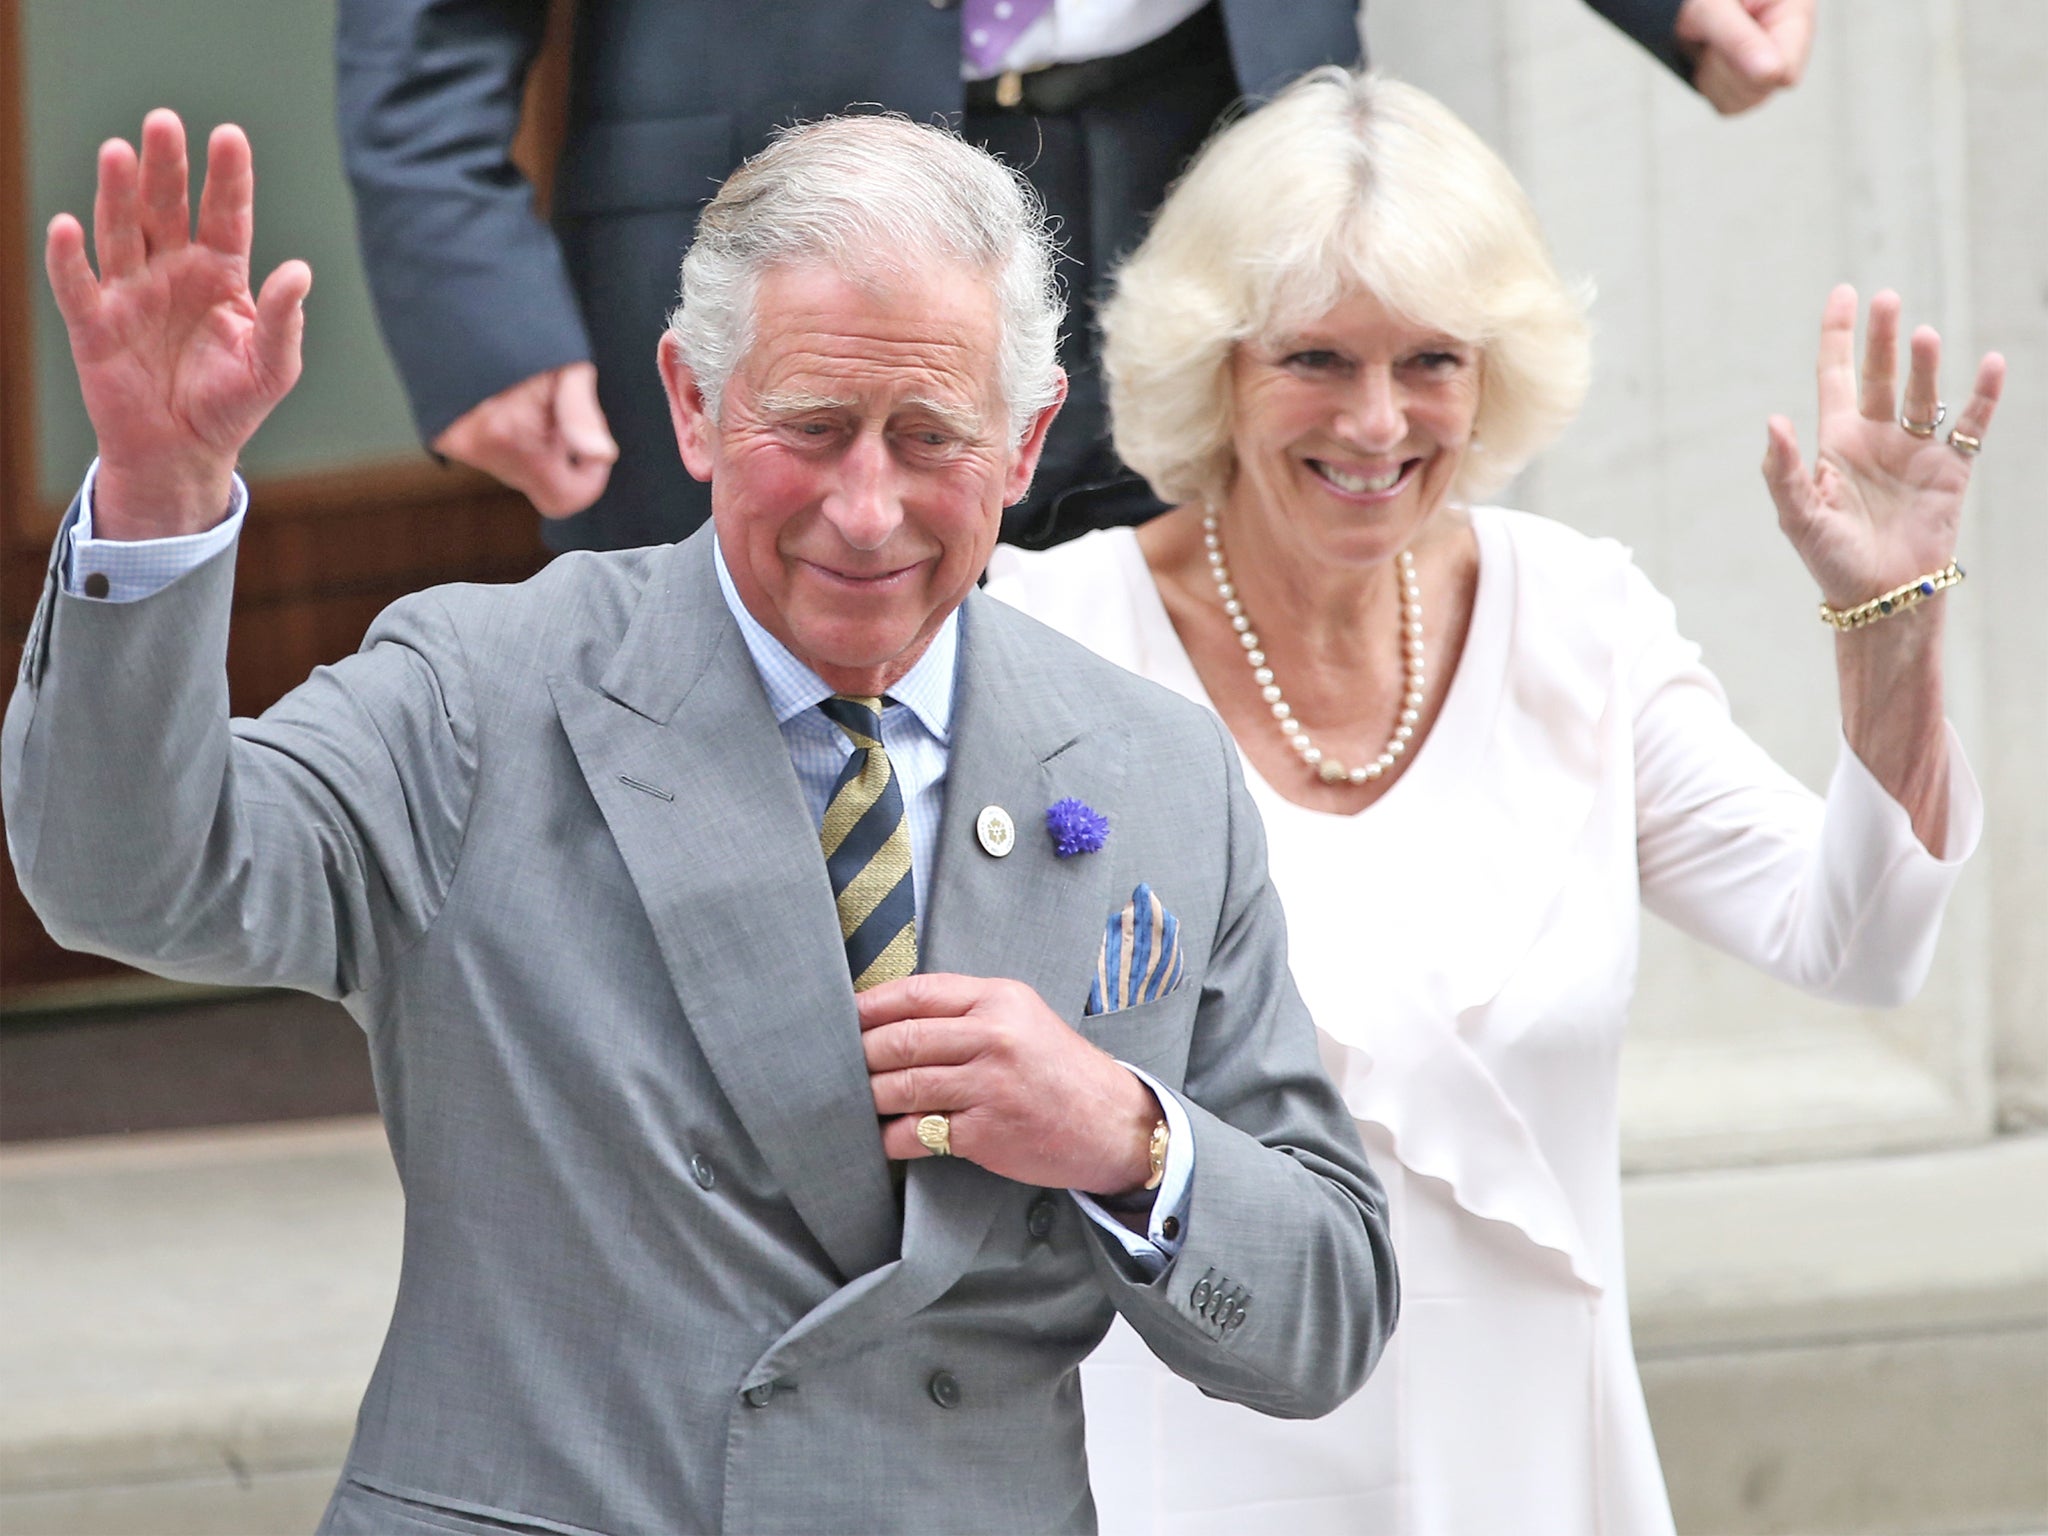 Prince Charles and Camilla leave The Lindo Wing after visiting The Duke and Duchess Of Cambridge and their newborn son at St Mary's.